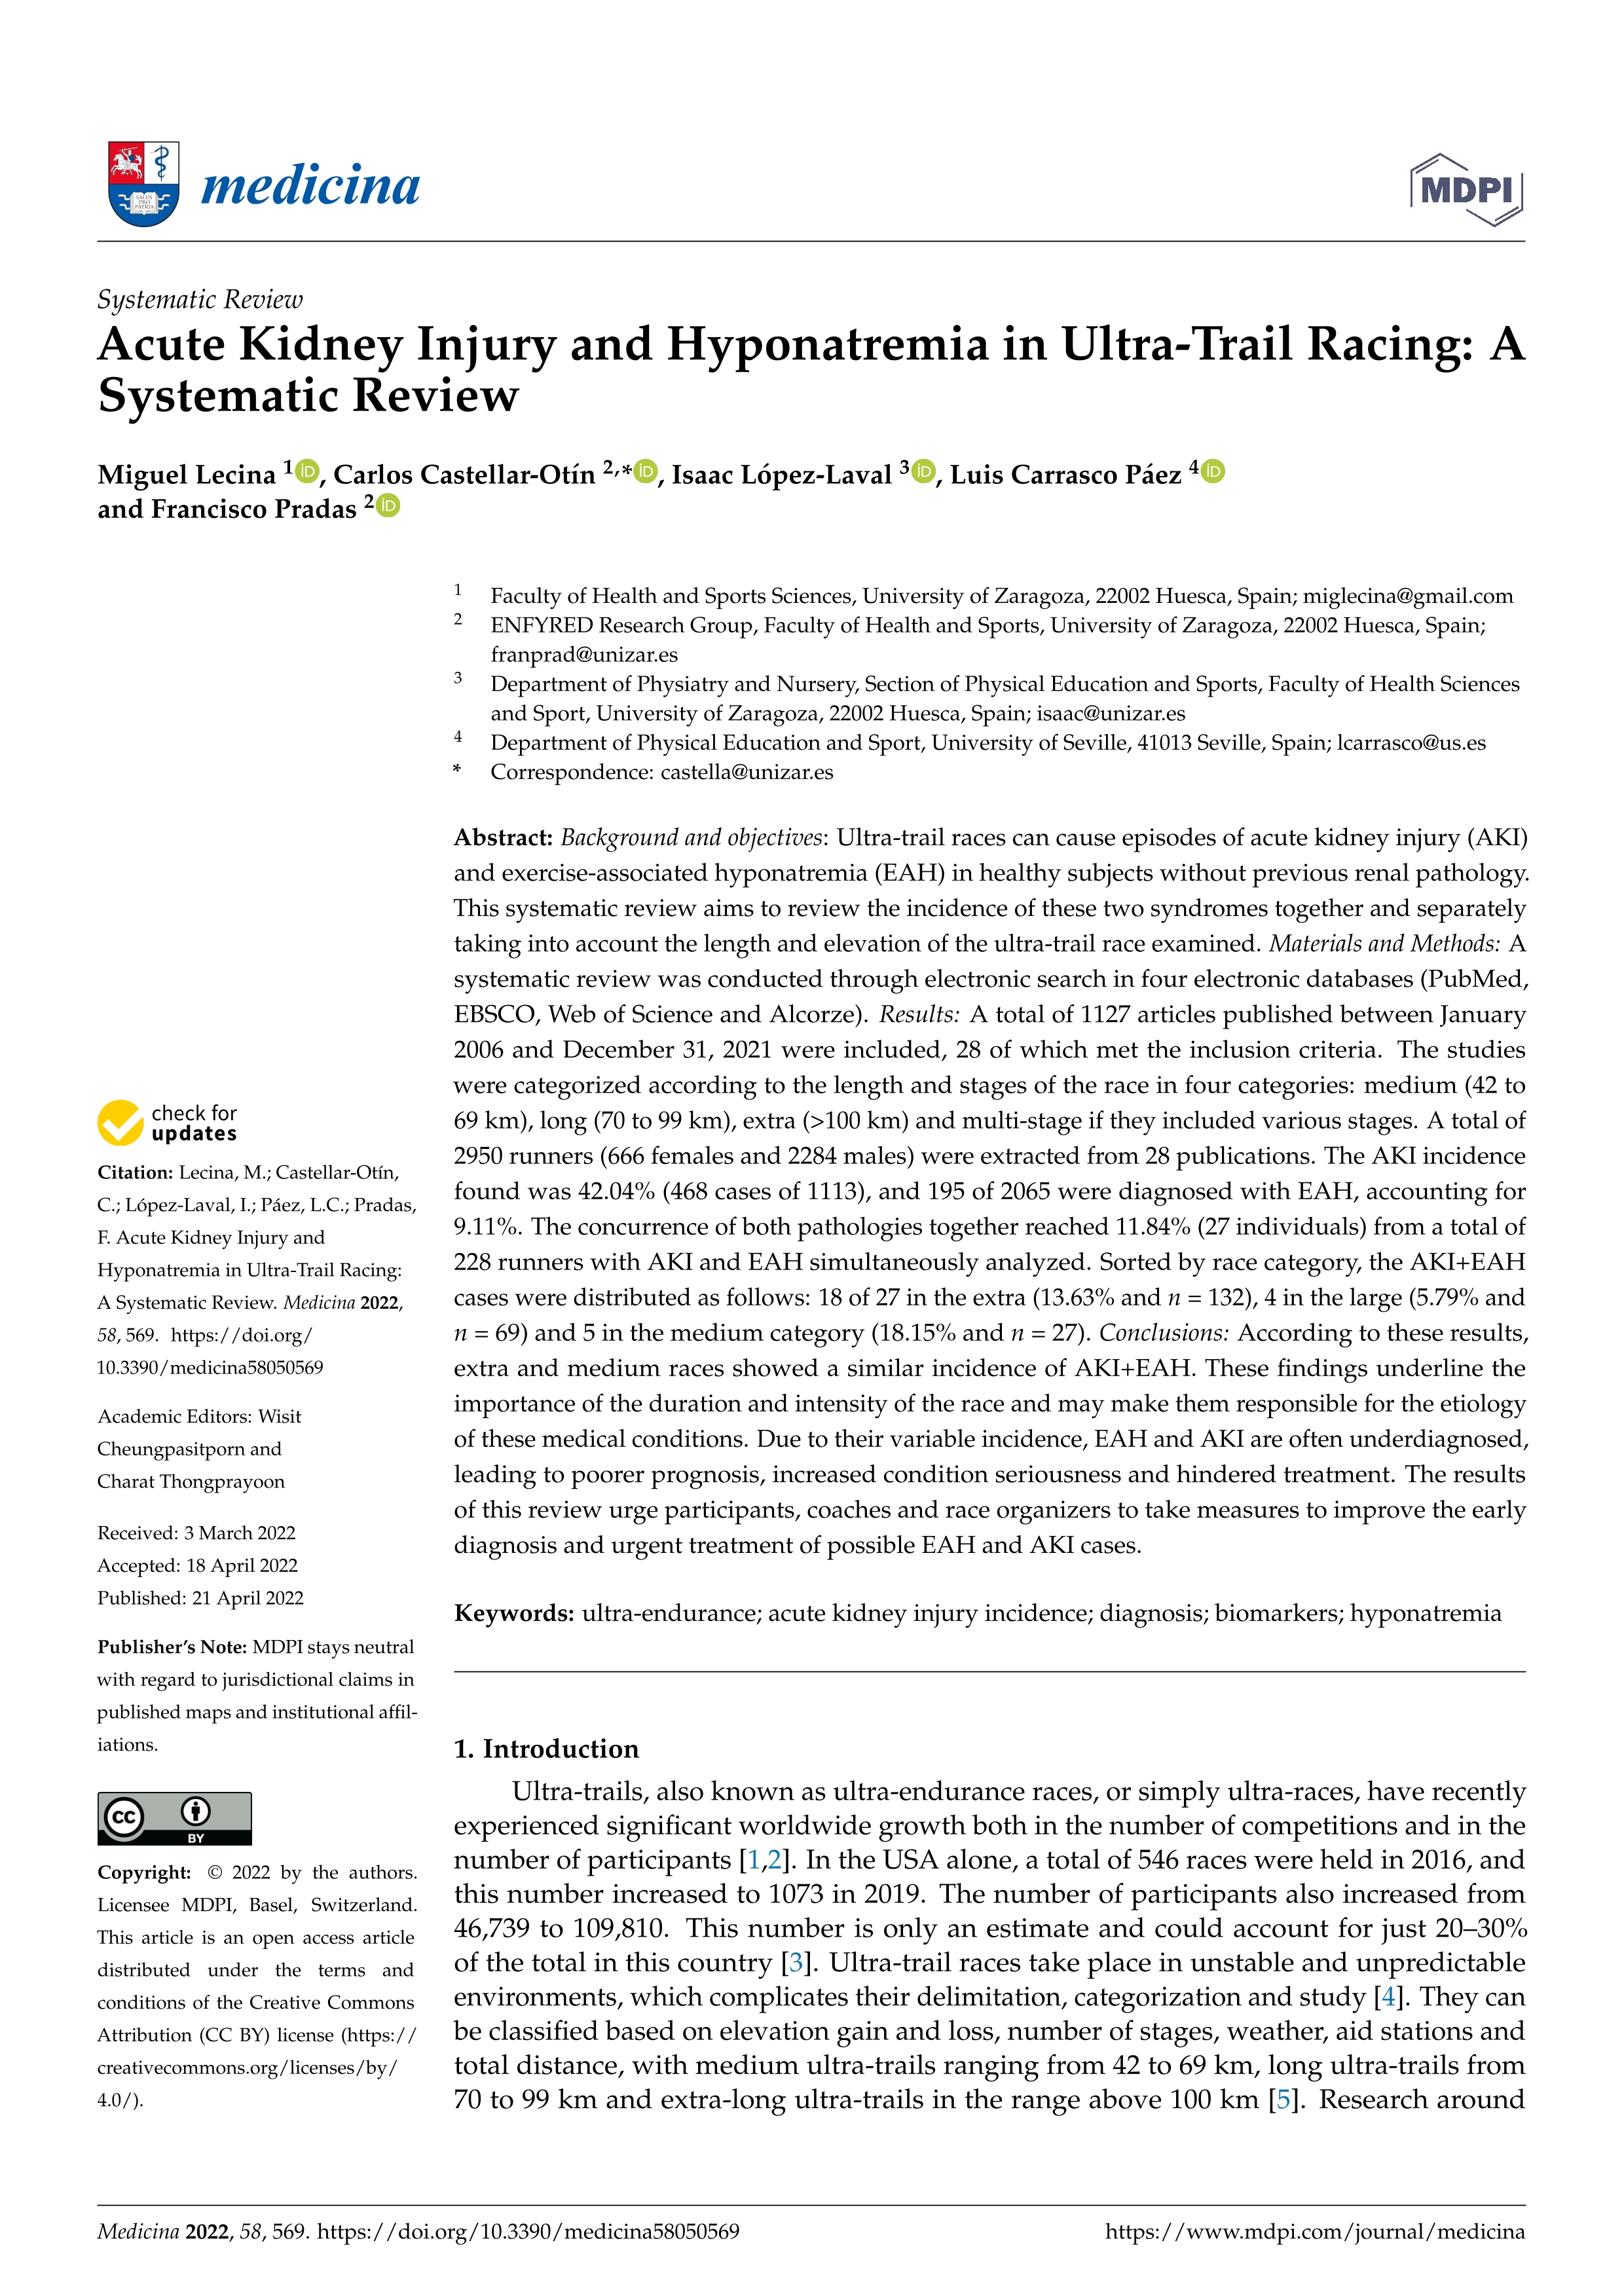 Acute kidney injury and hyponatremia in ultra-trail racing: a systematic review